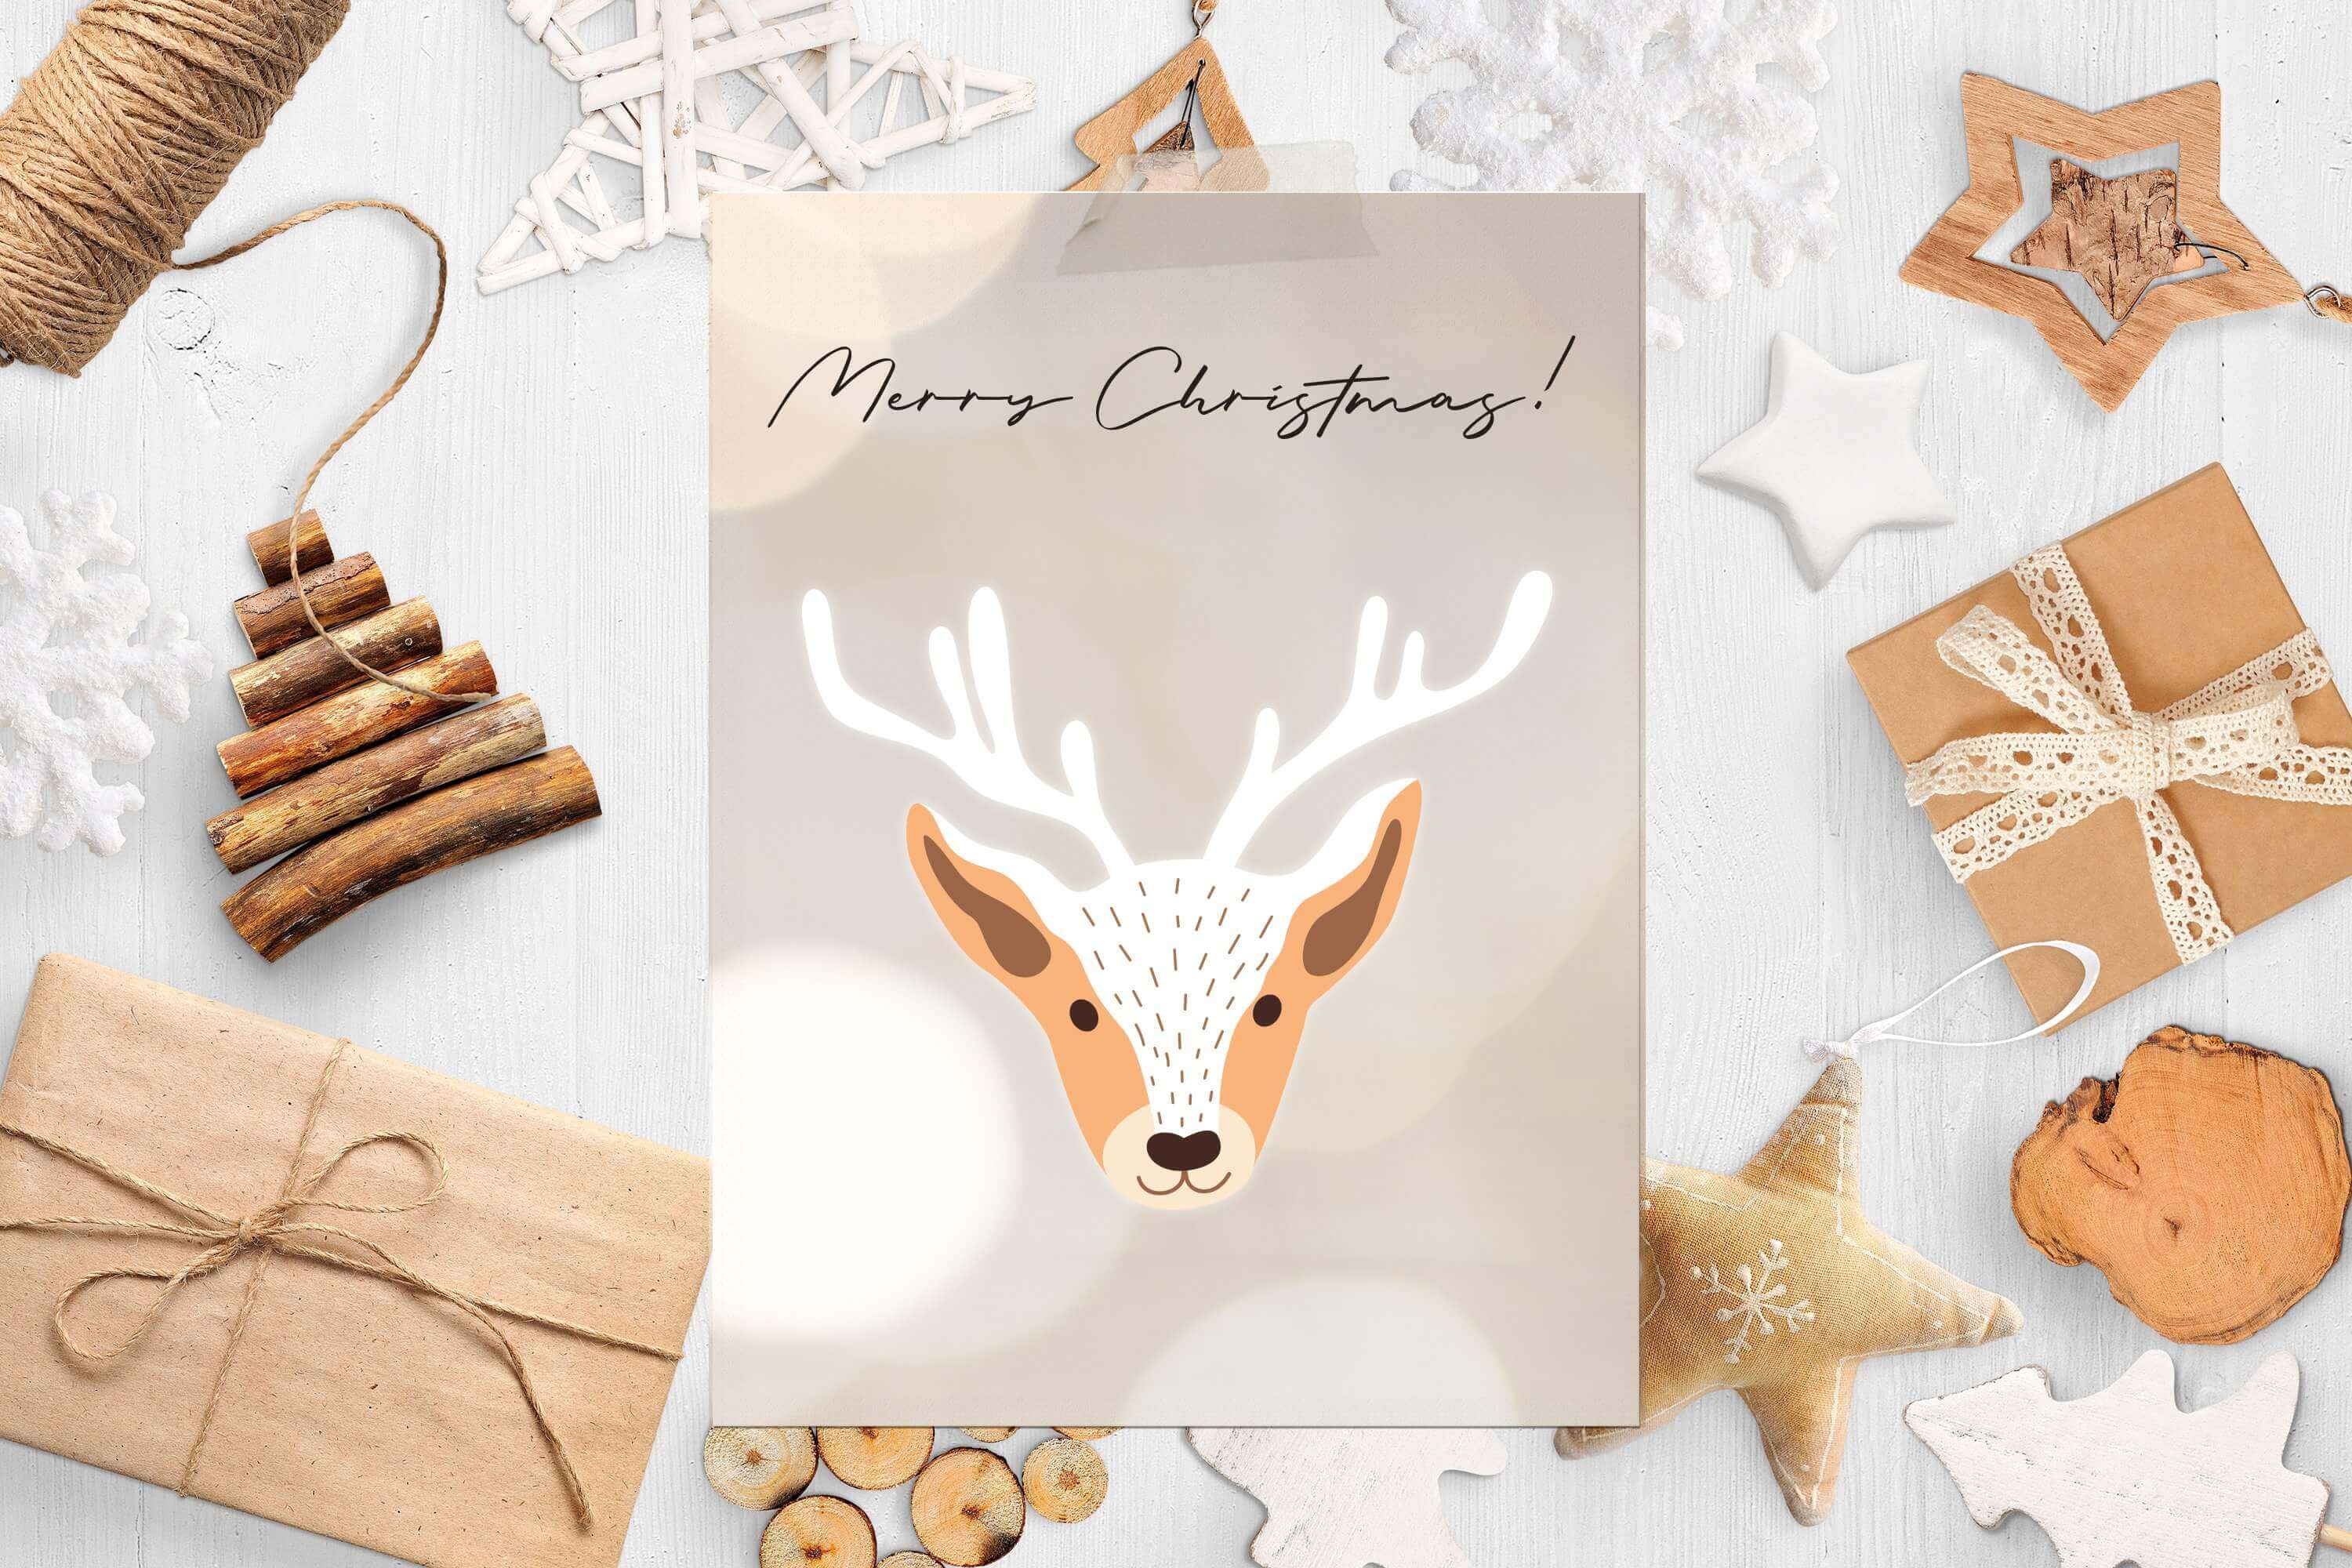 Card with Words Merry Christmas and Image Deer Head.